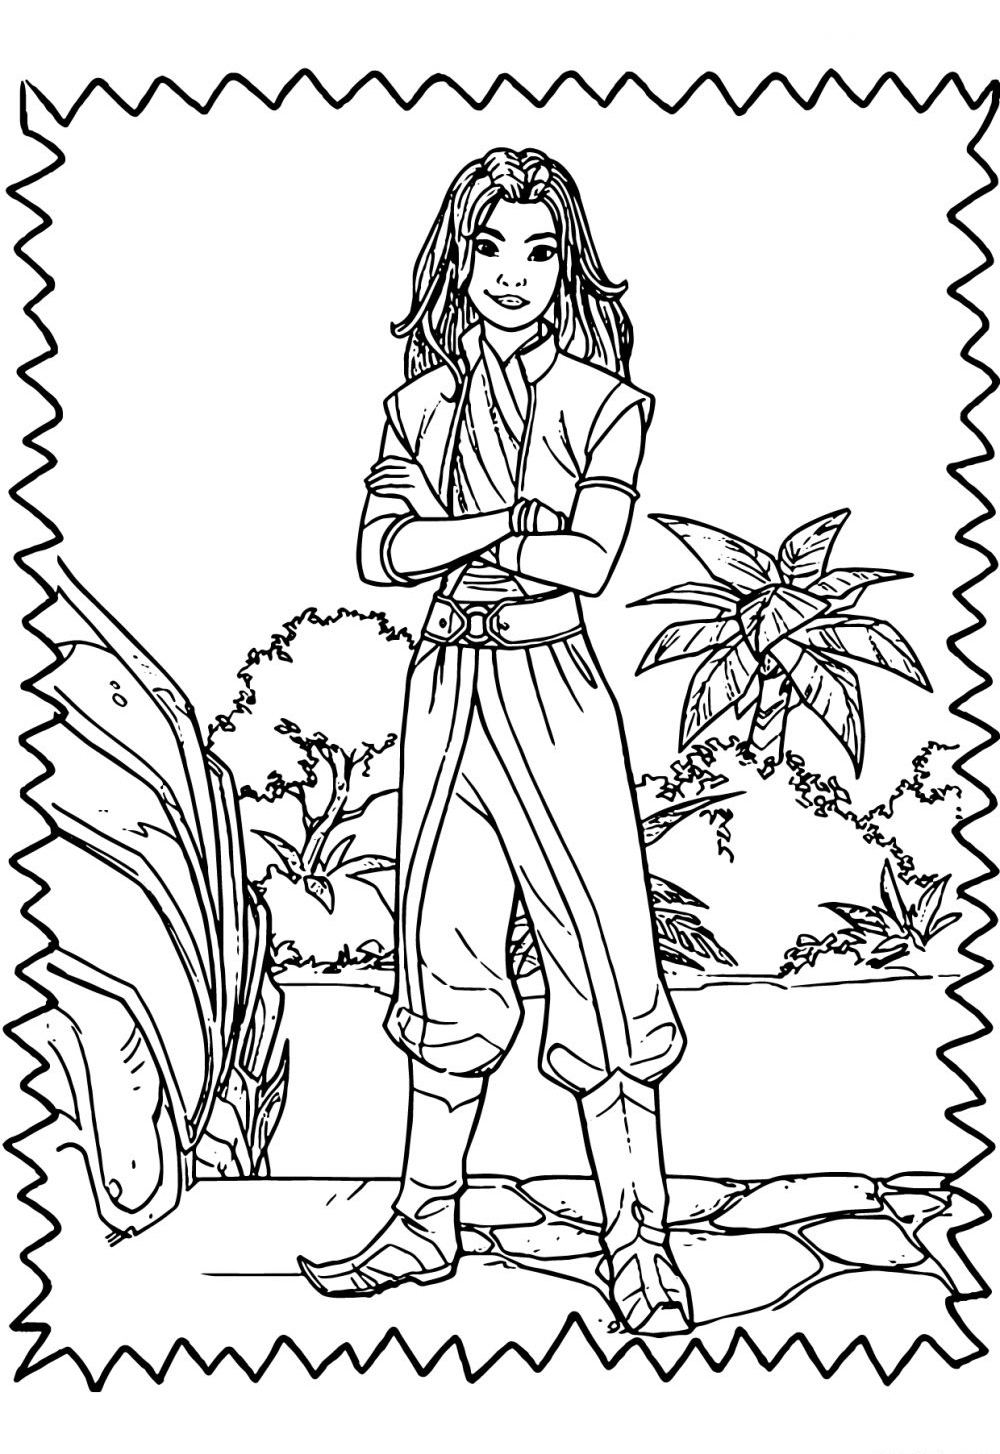 Coloring pages of Raya and the last Dragon for printing